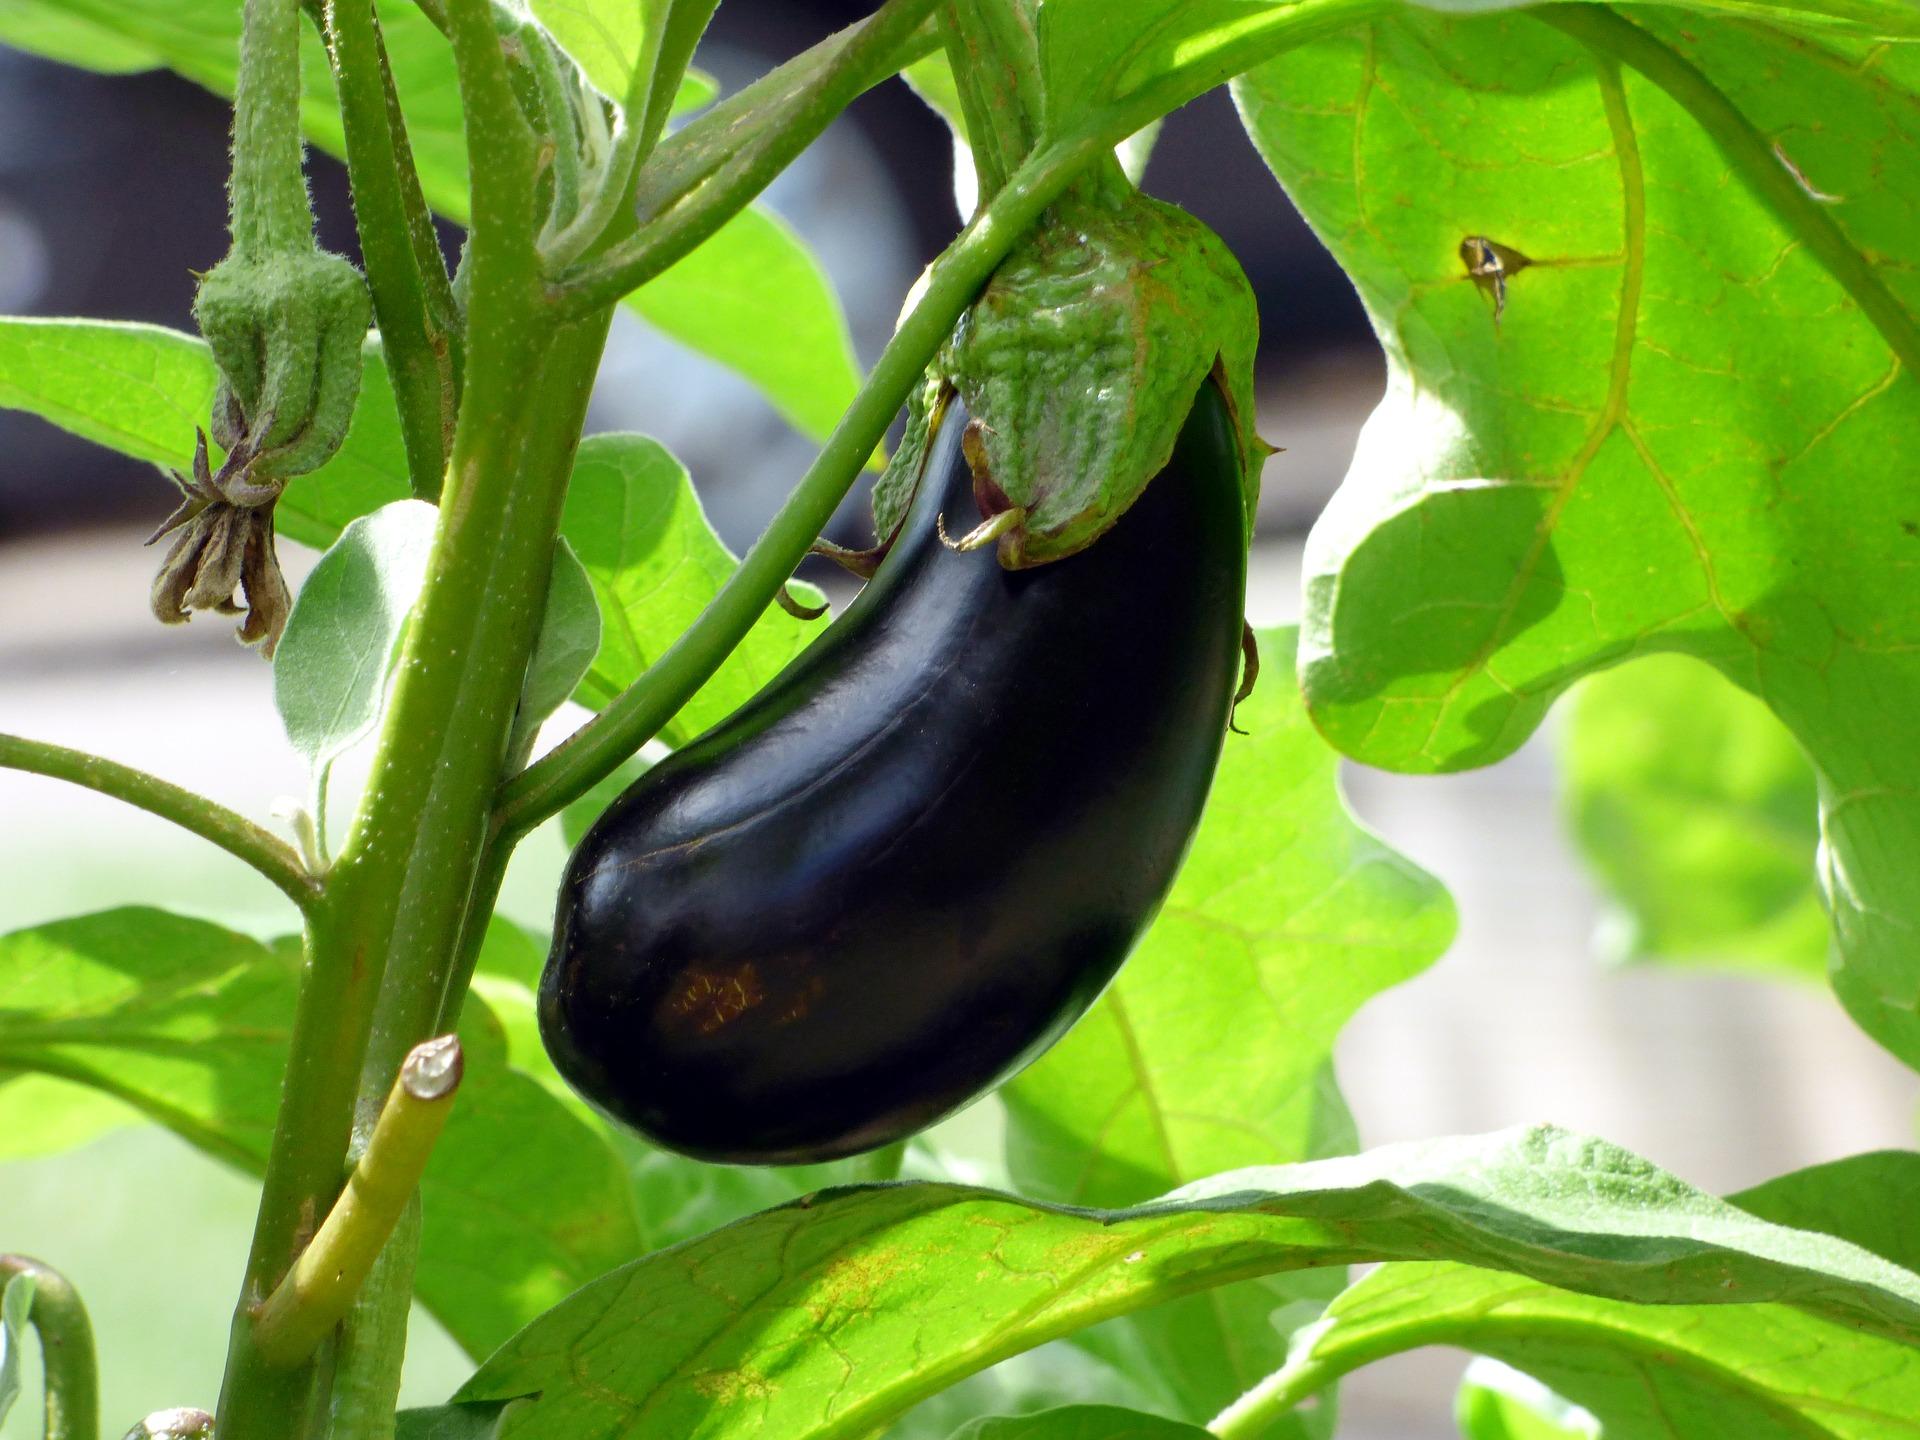 Growing Eggplant in a Home Garden | University of Maryland Extension